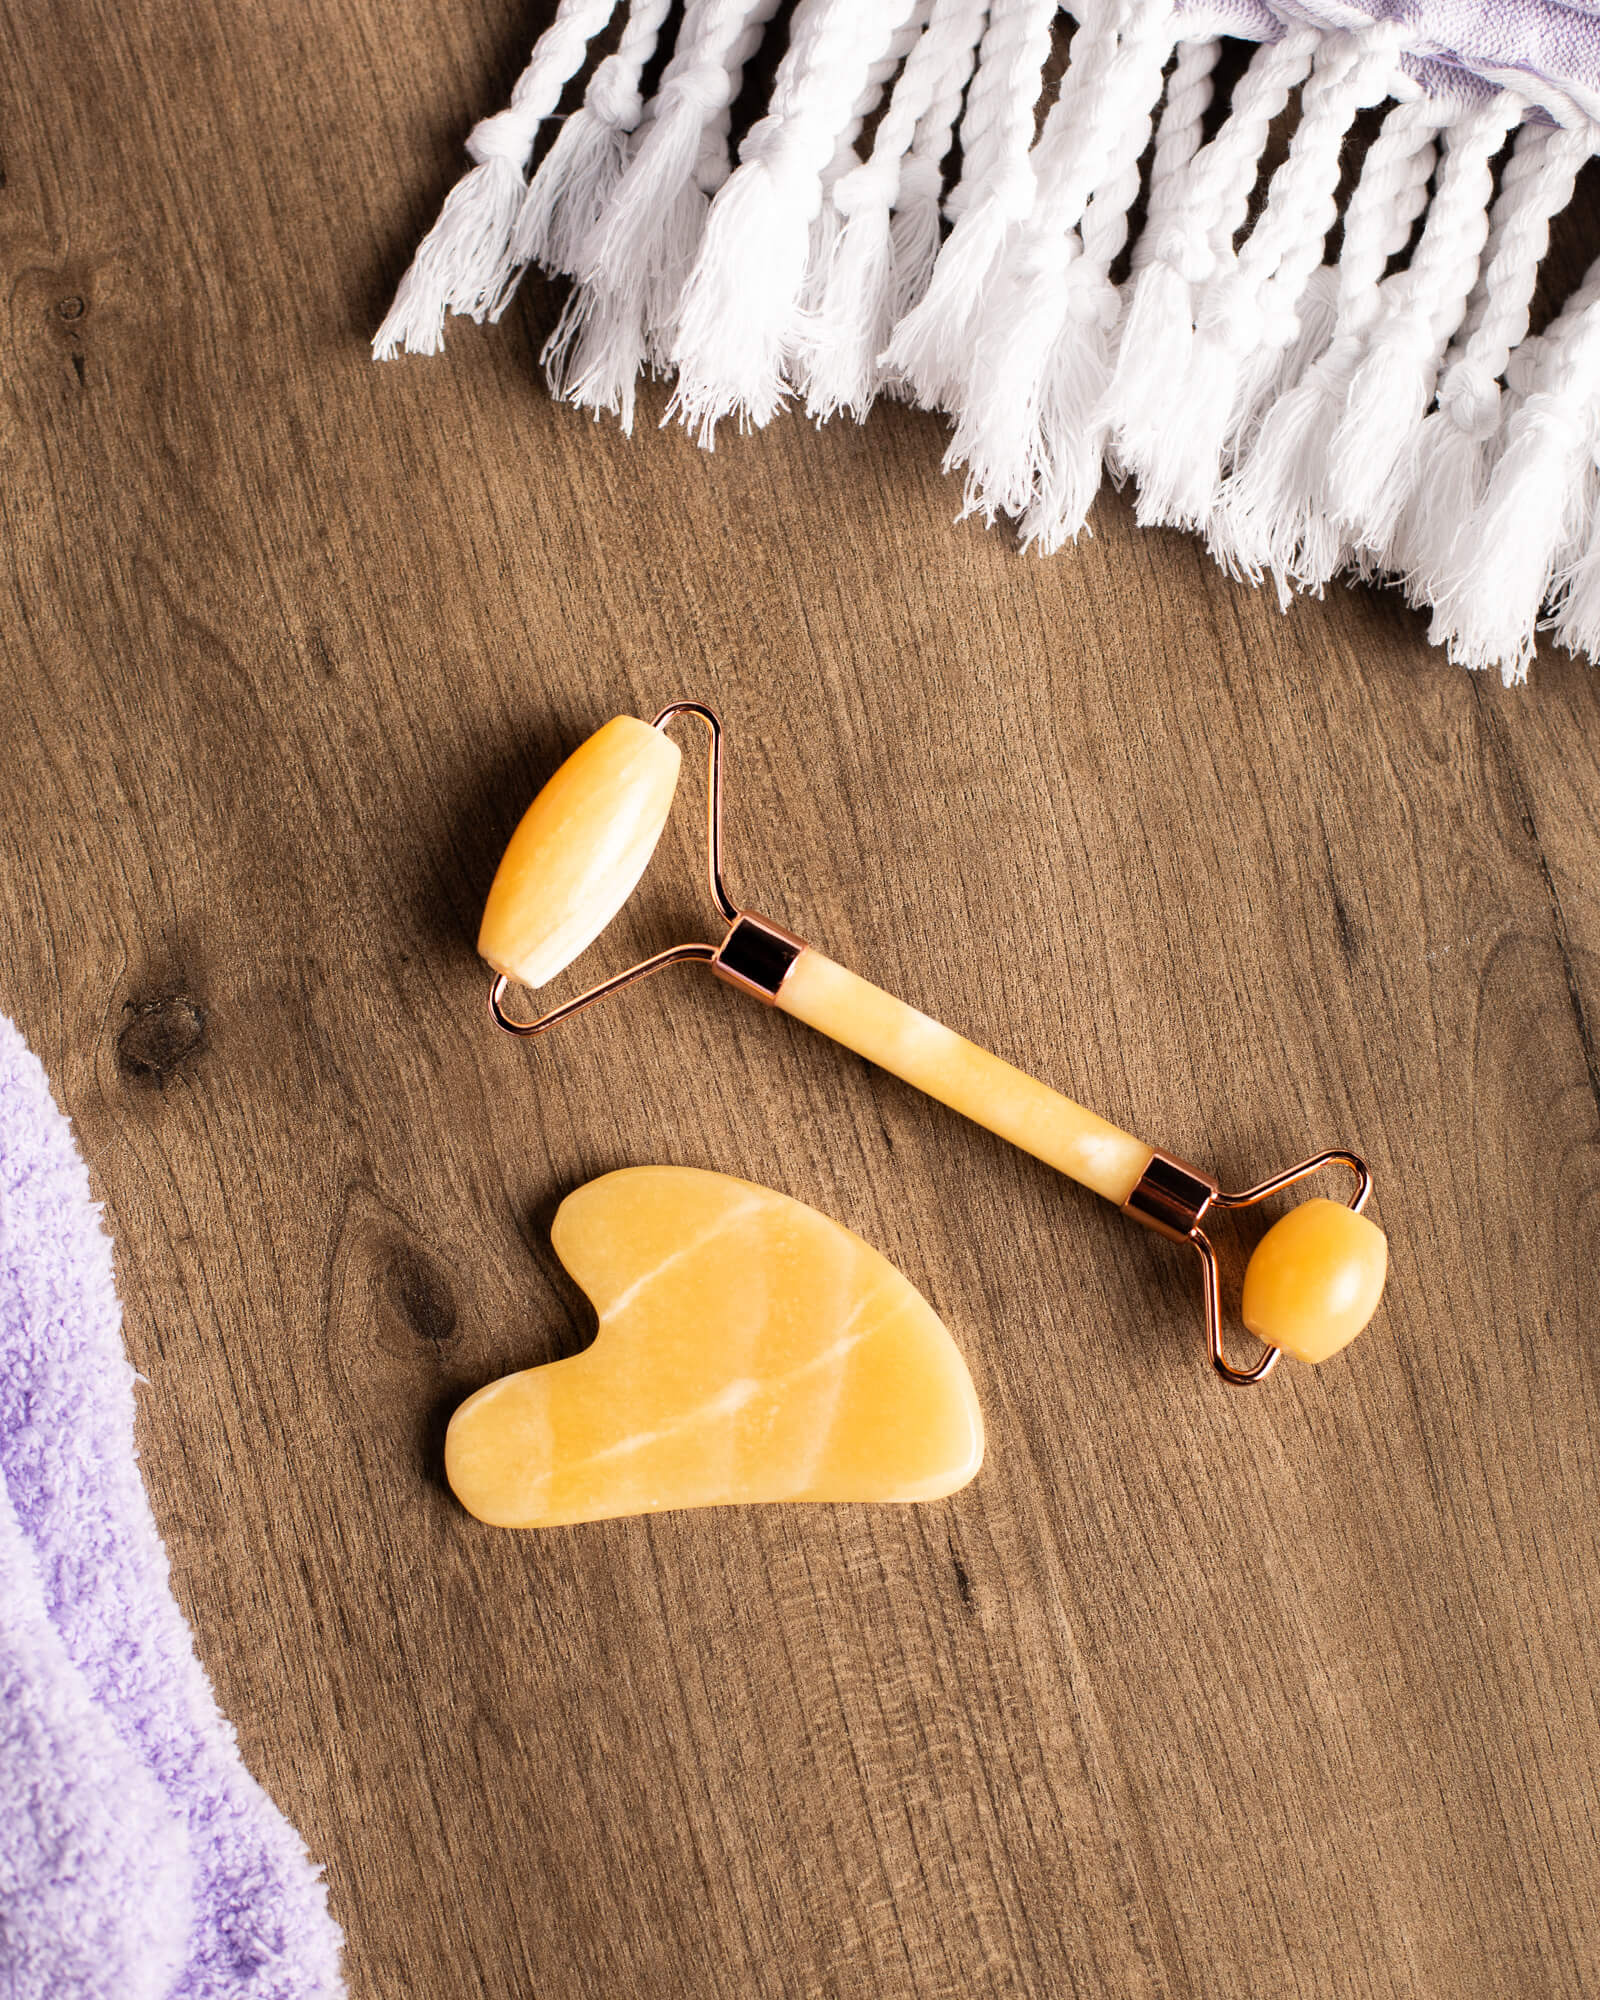 Photo of Gua Sha set included in Deluxe Self Care Bundle